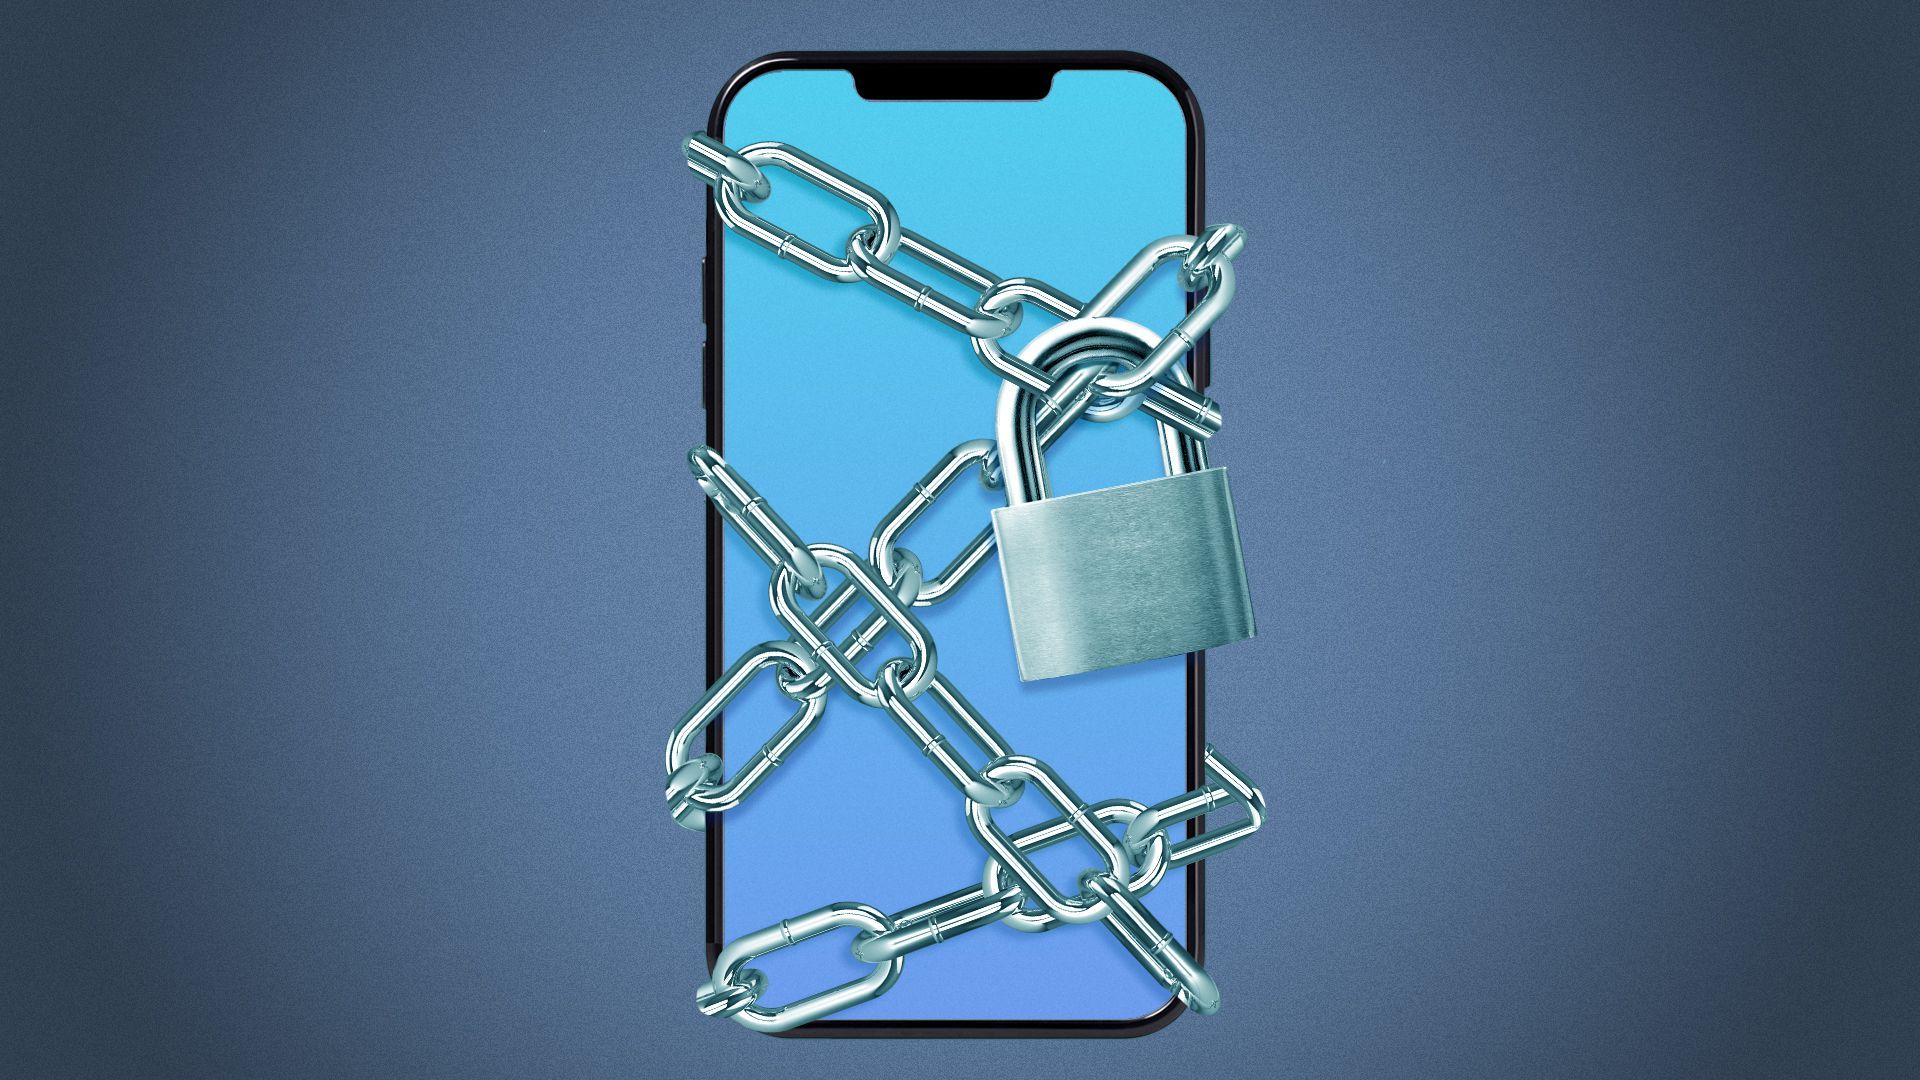 Illustration of chains and padlock wrapped around a phone.